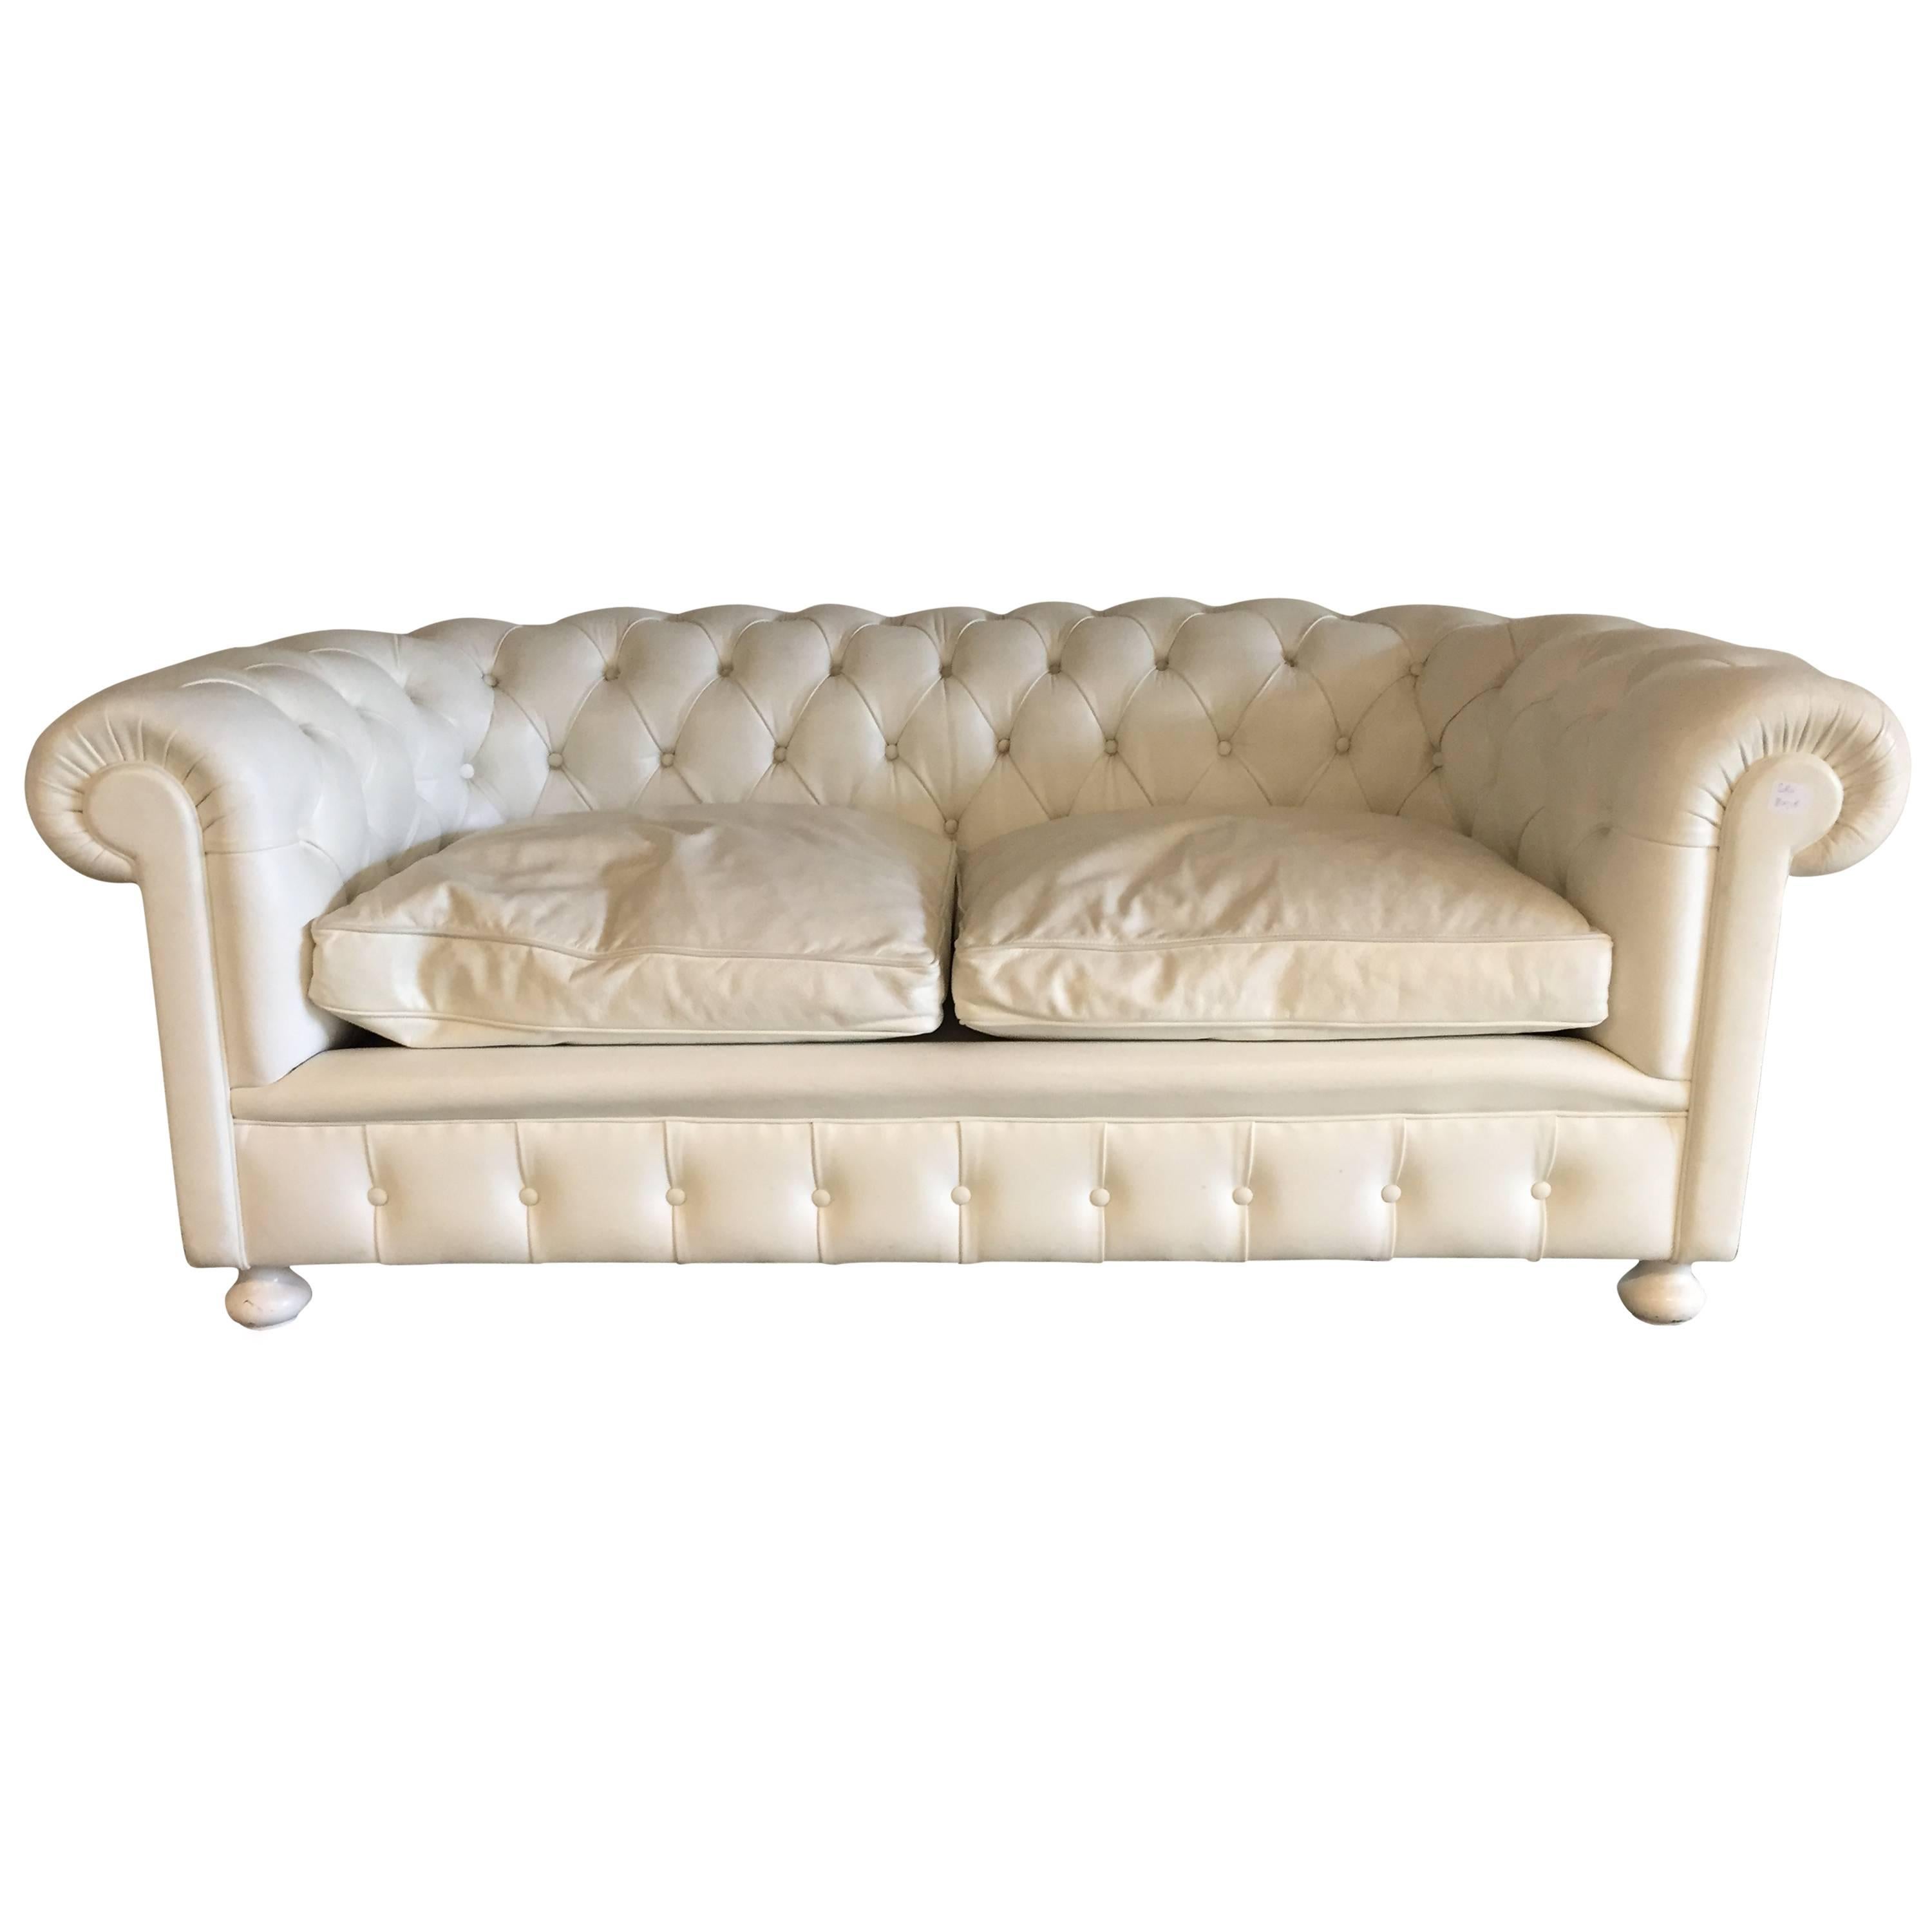 White Chesterfield, Very Nice Patina For Sale